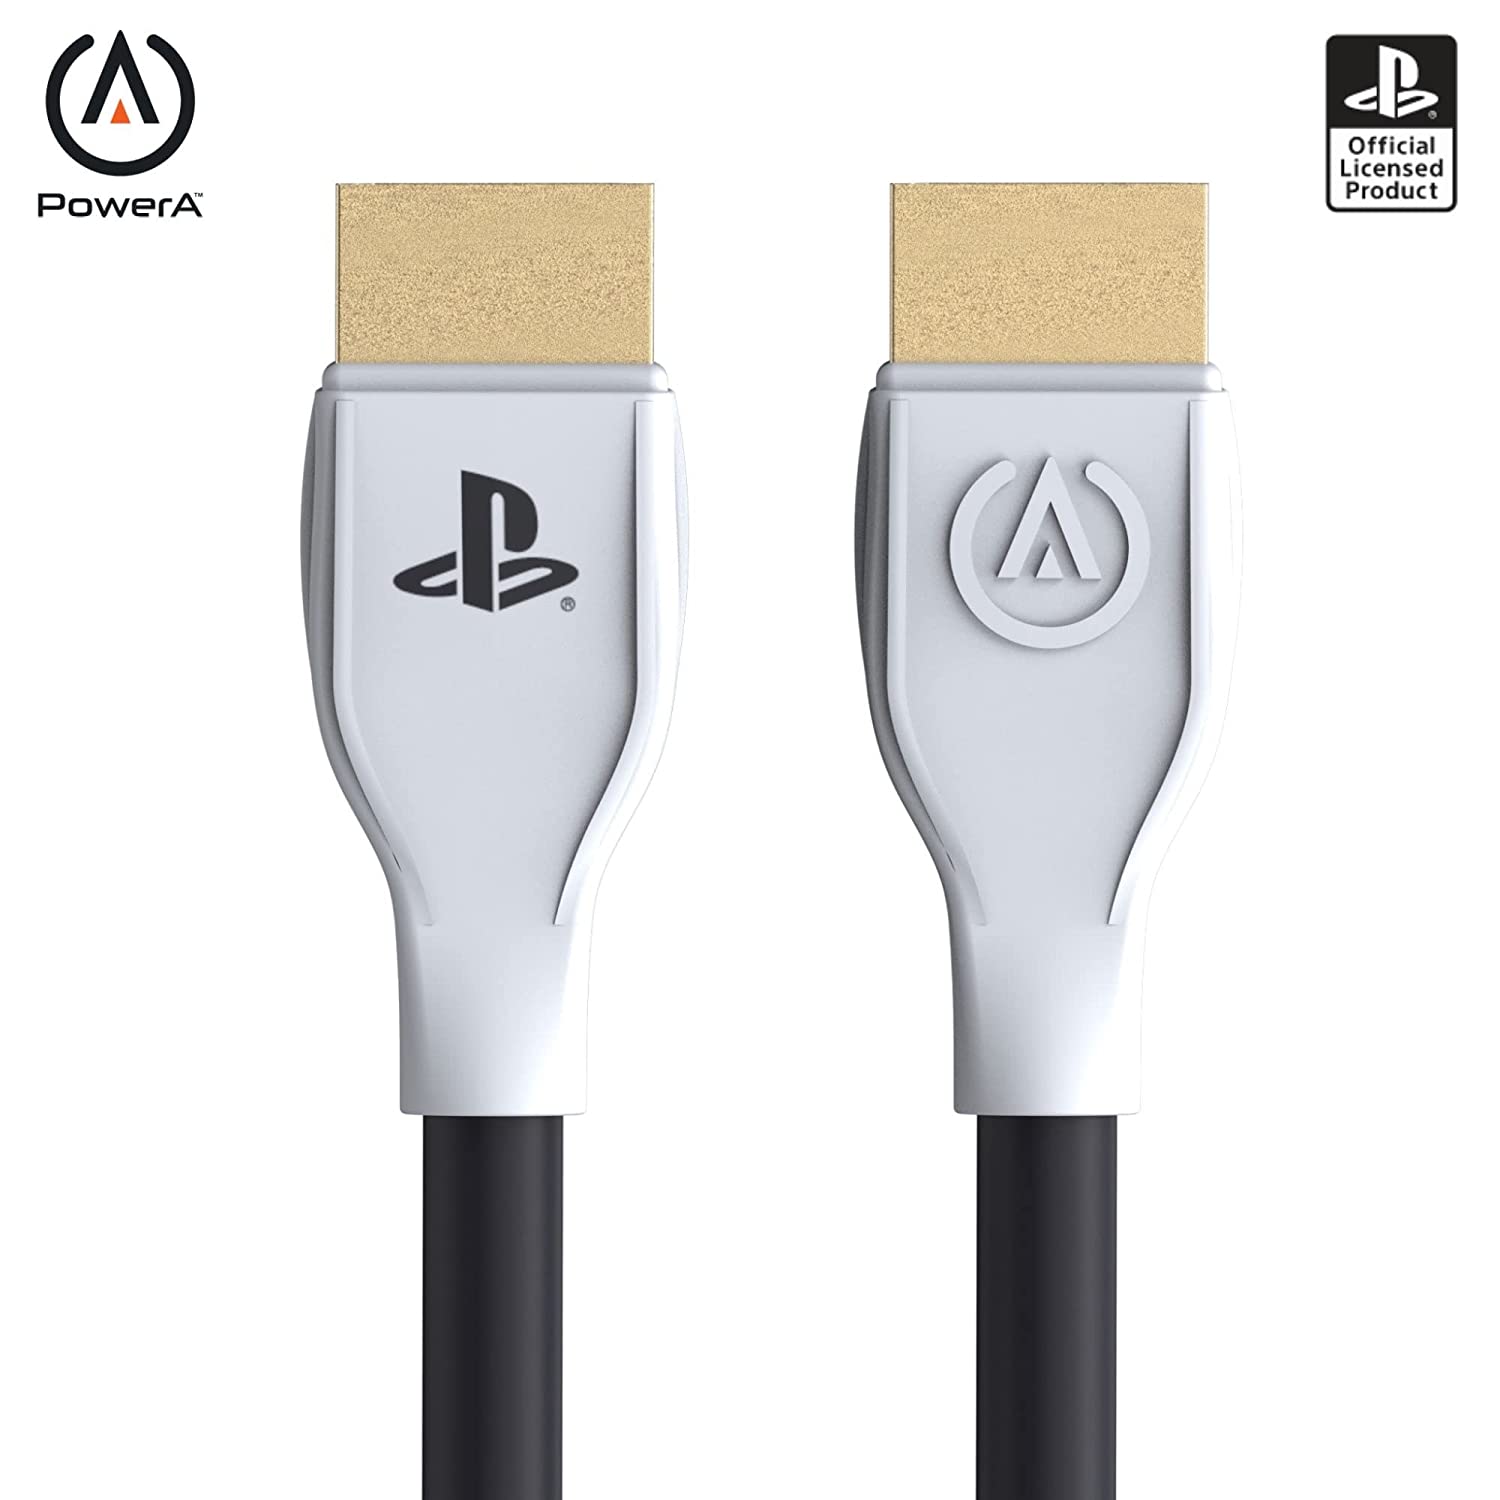 PowerA Ultra High Speed HDMI Cable for Playstation 5, Cable, HDMI 2.1, –  iGeek Megastore